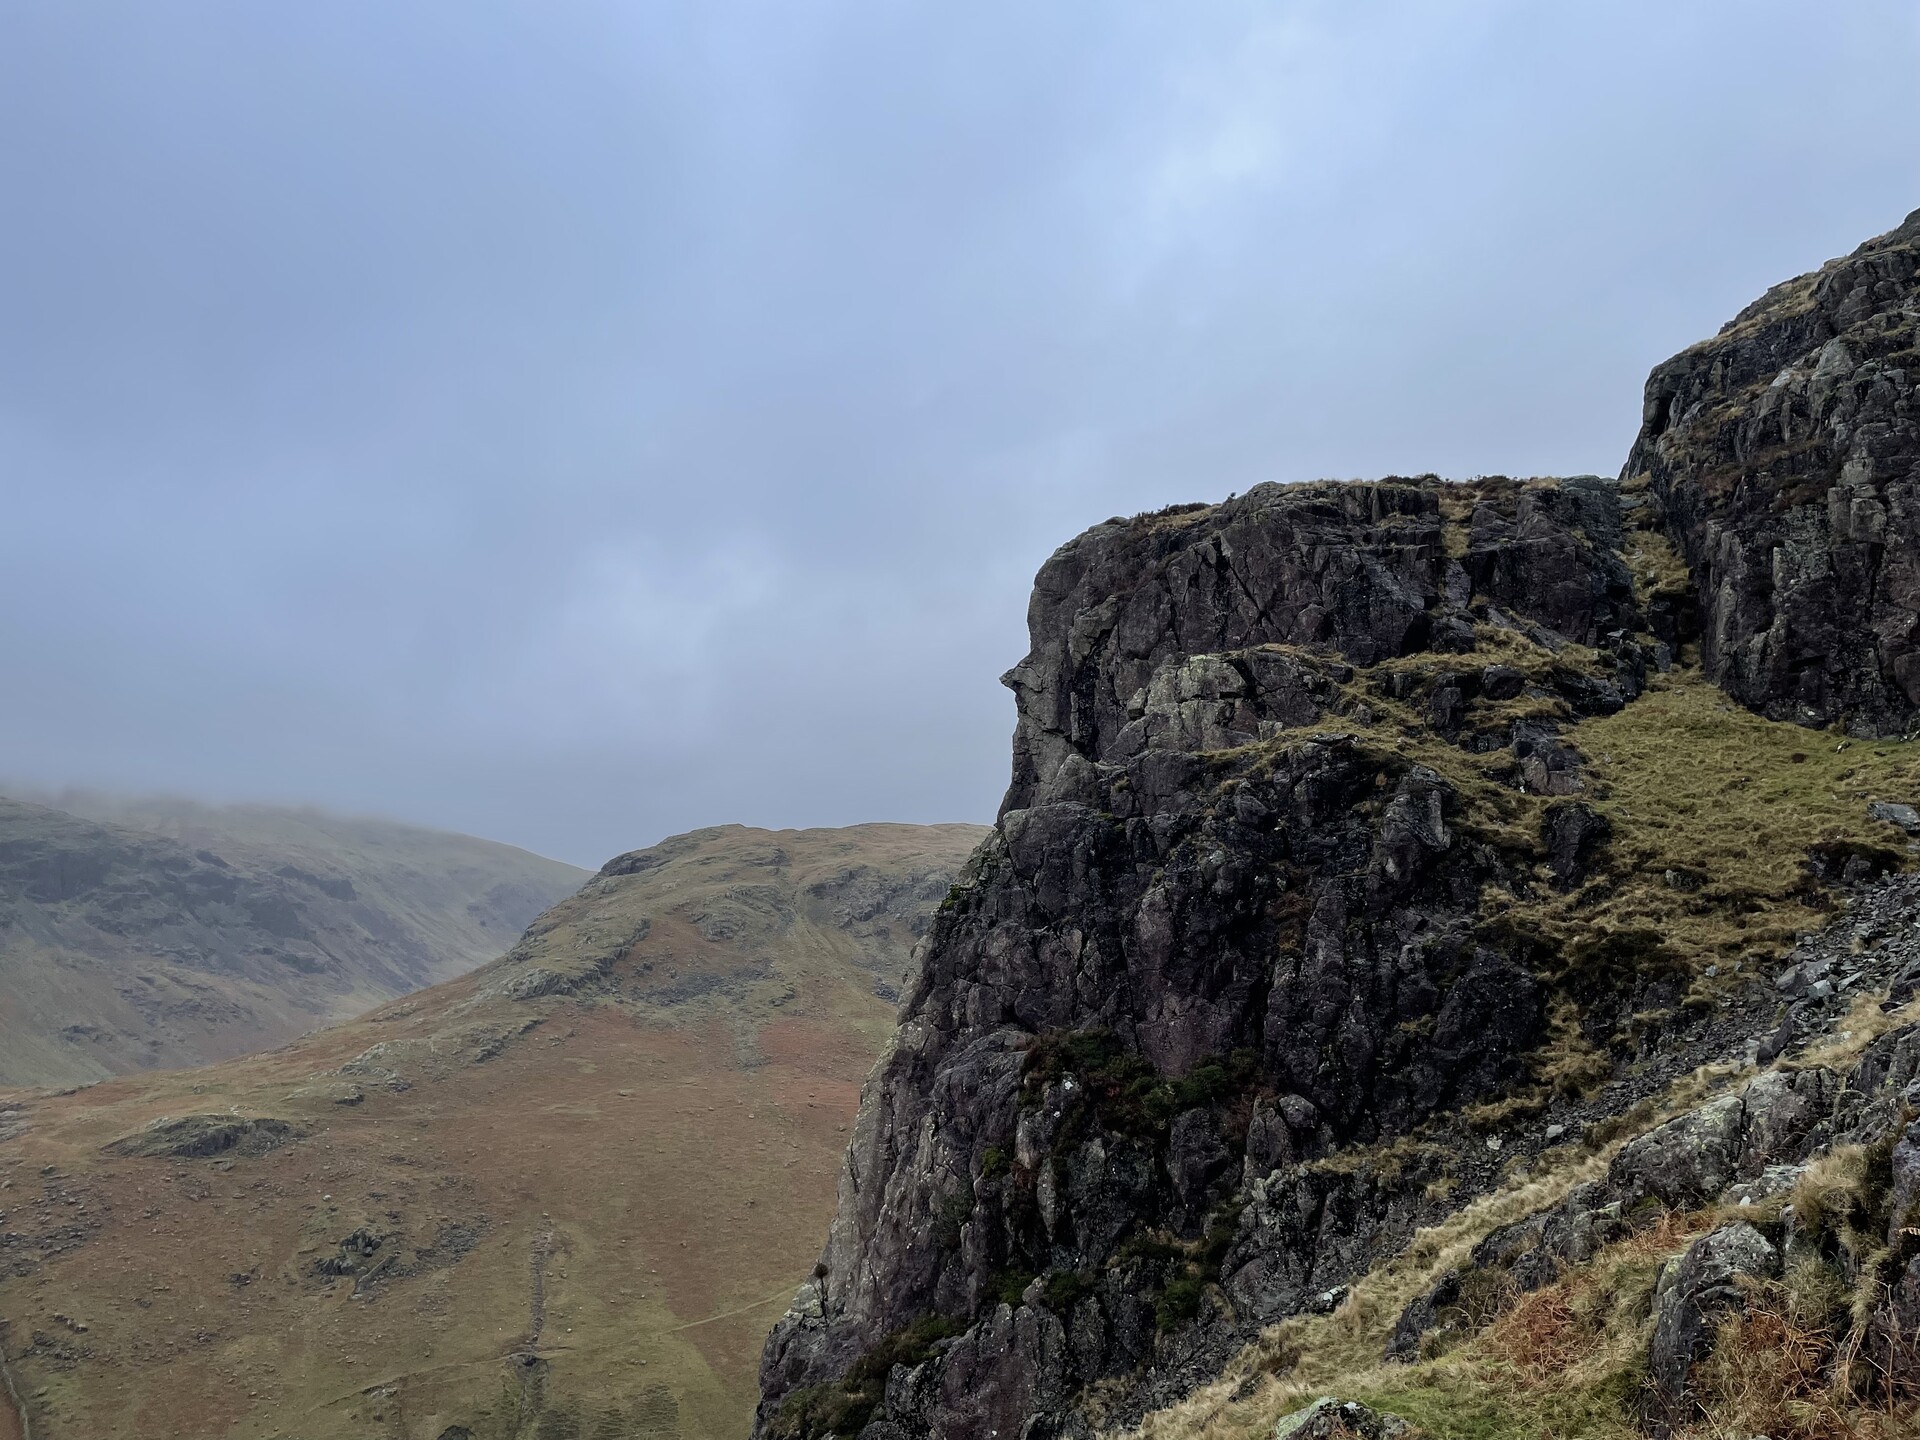 A suspiciously face-shaped crag on the side of Yewbarrow, above Wastwater in the Lake District